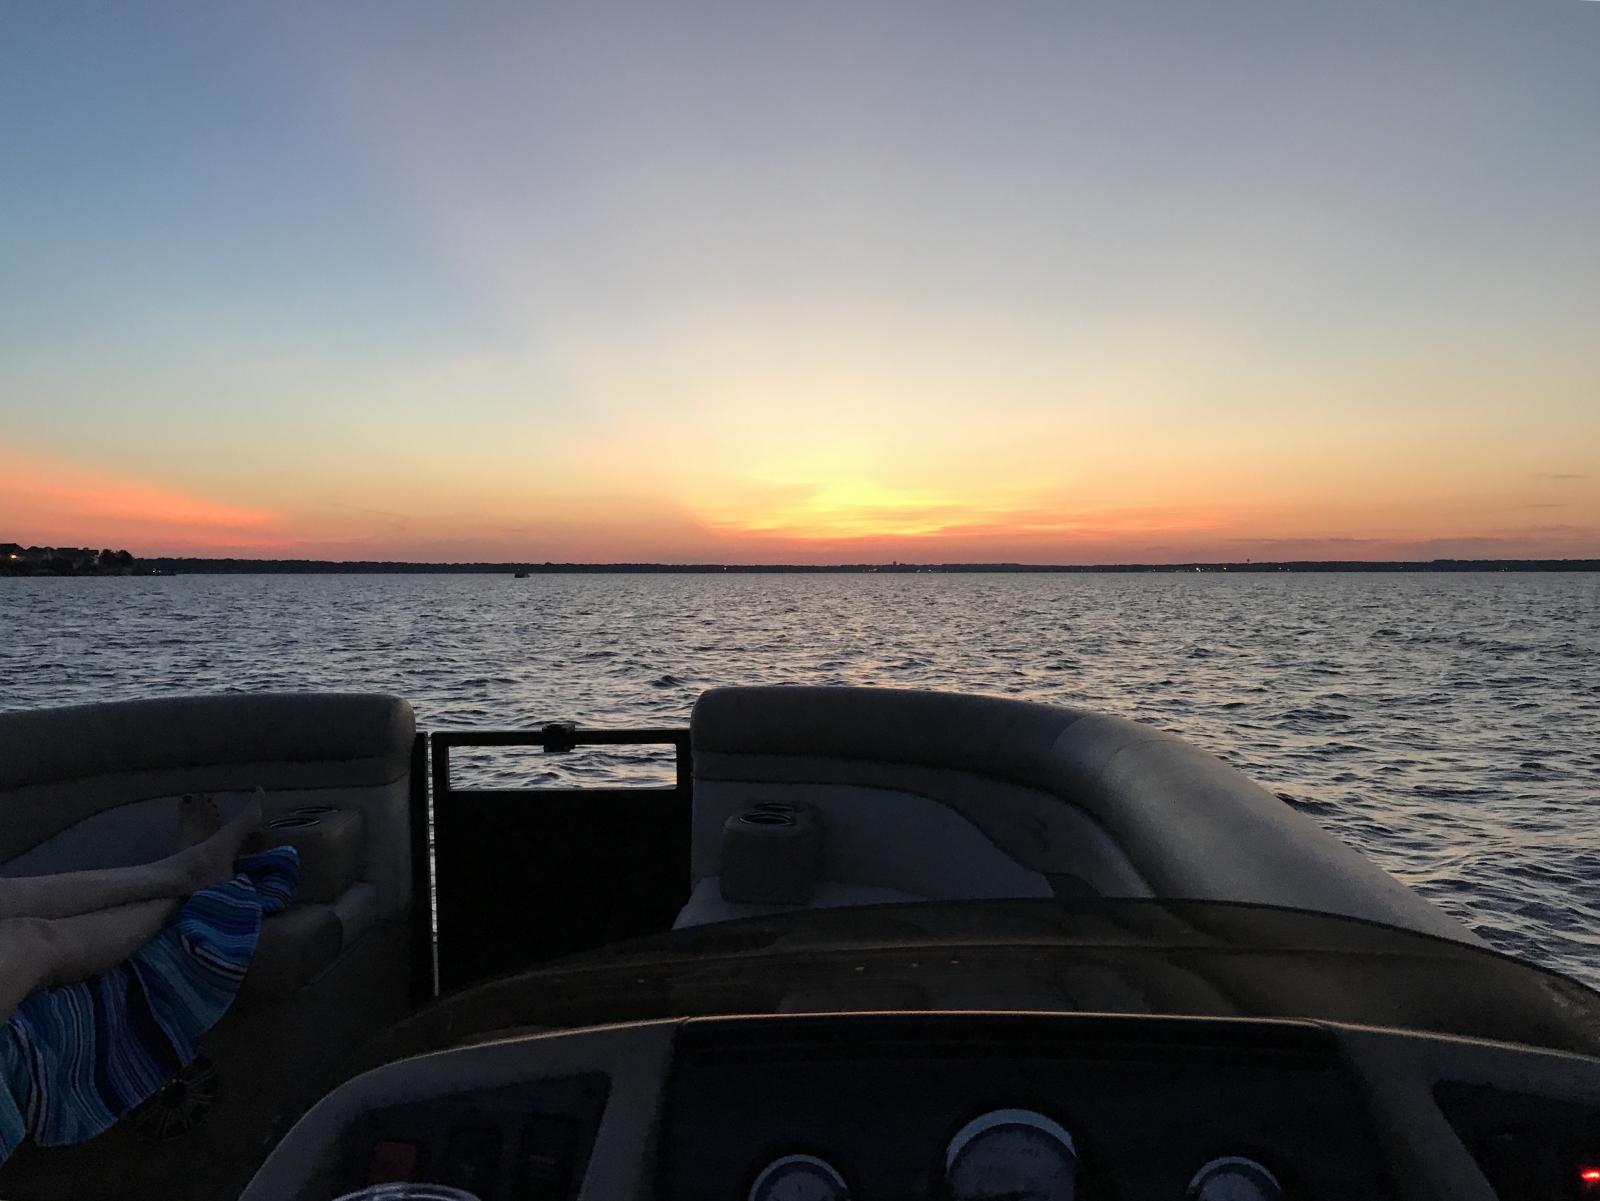 Our Thursday evening sunset cruise.